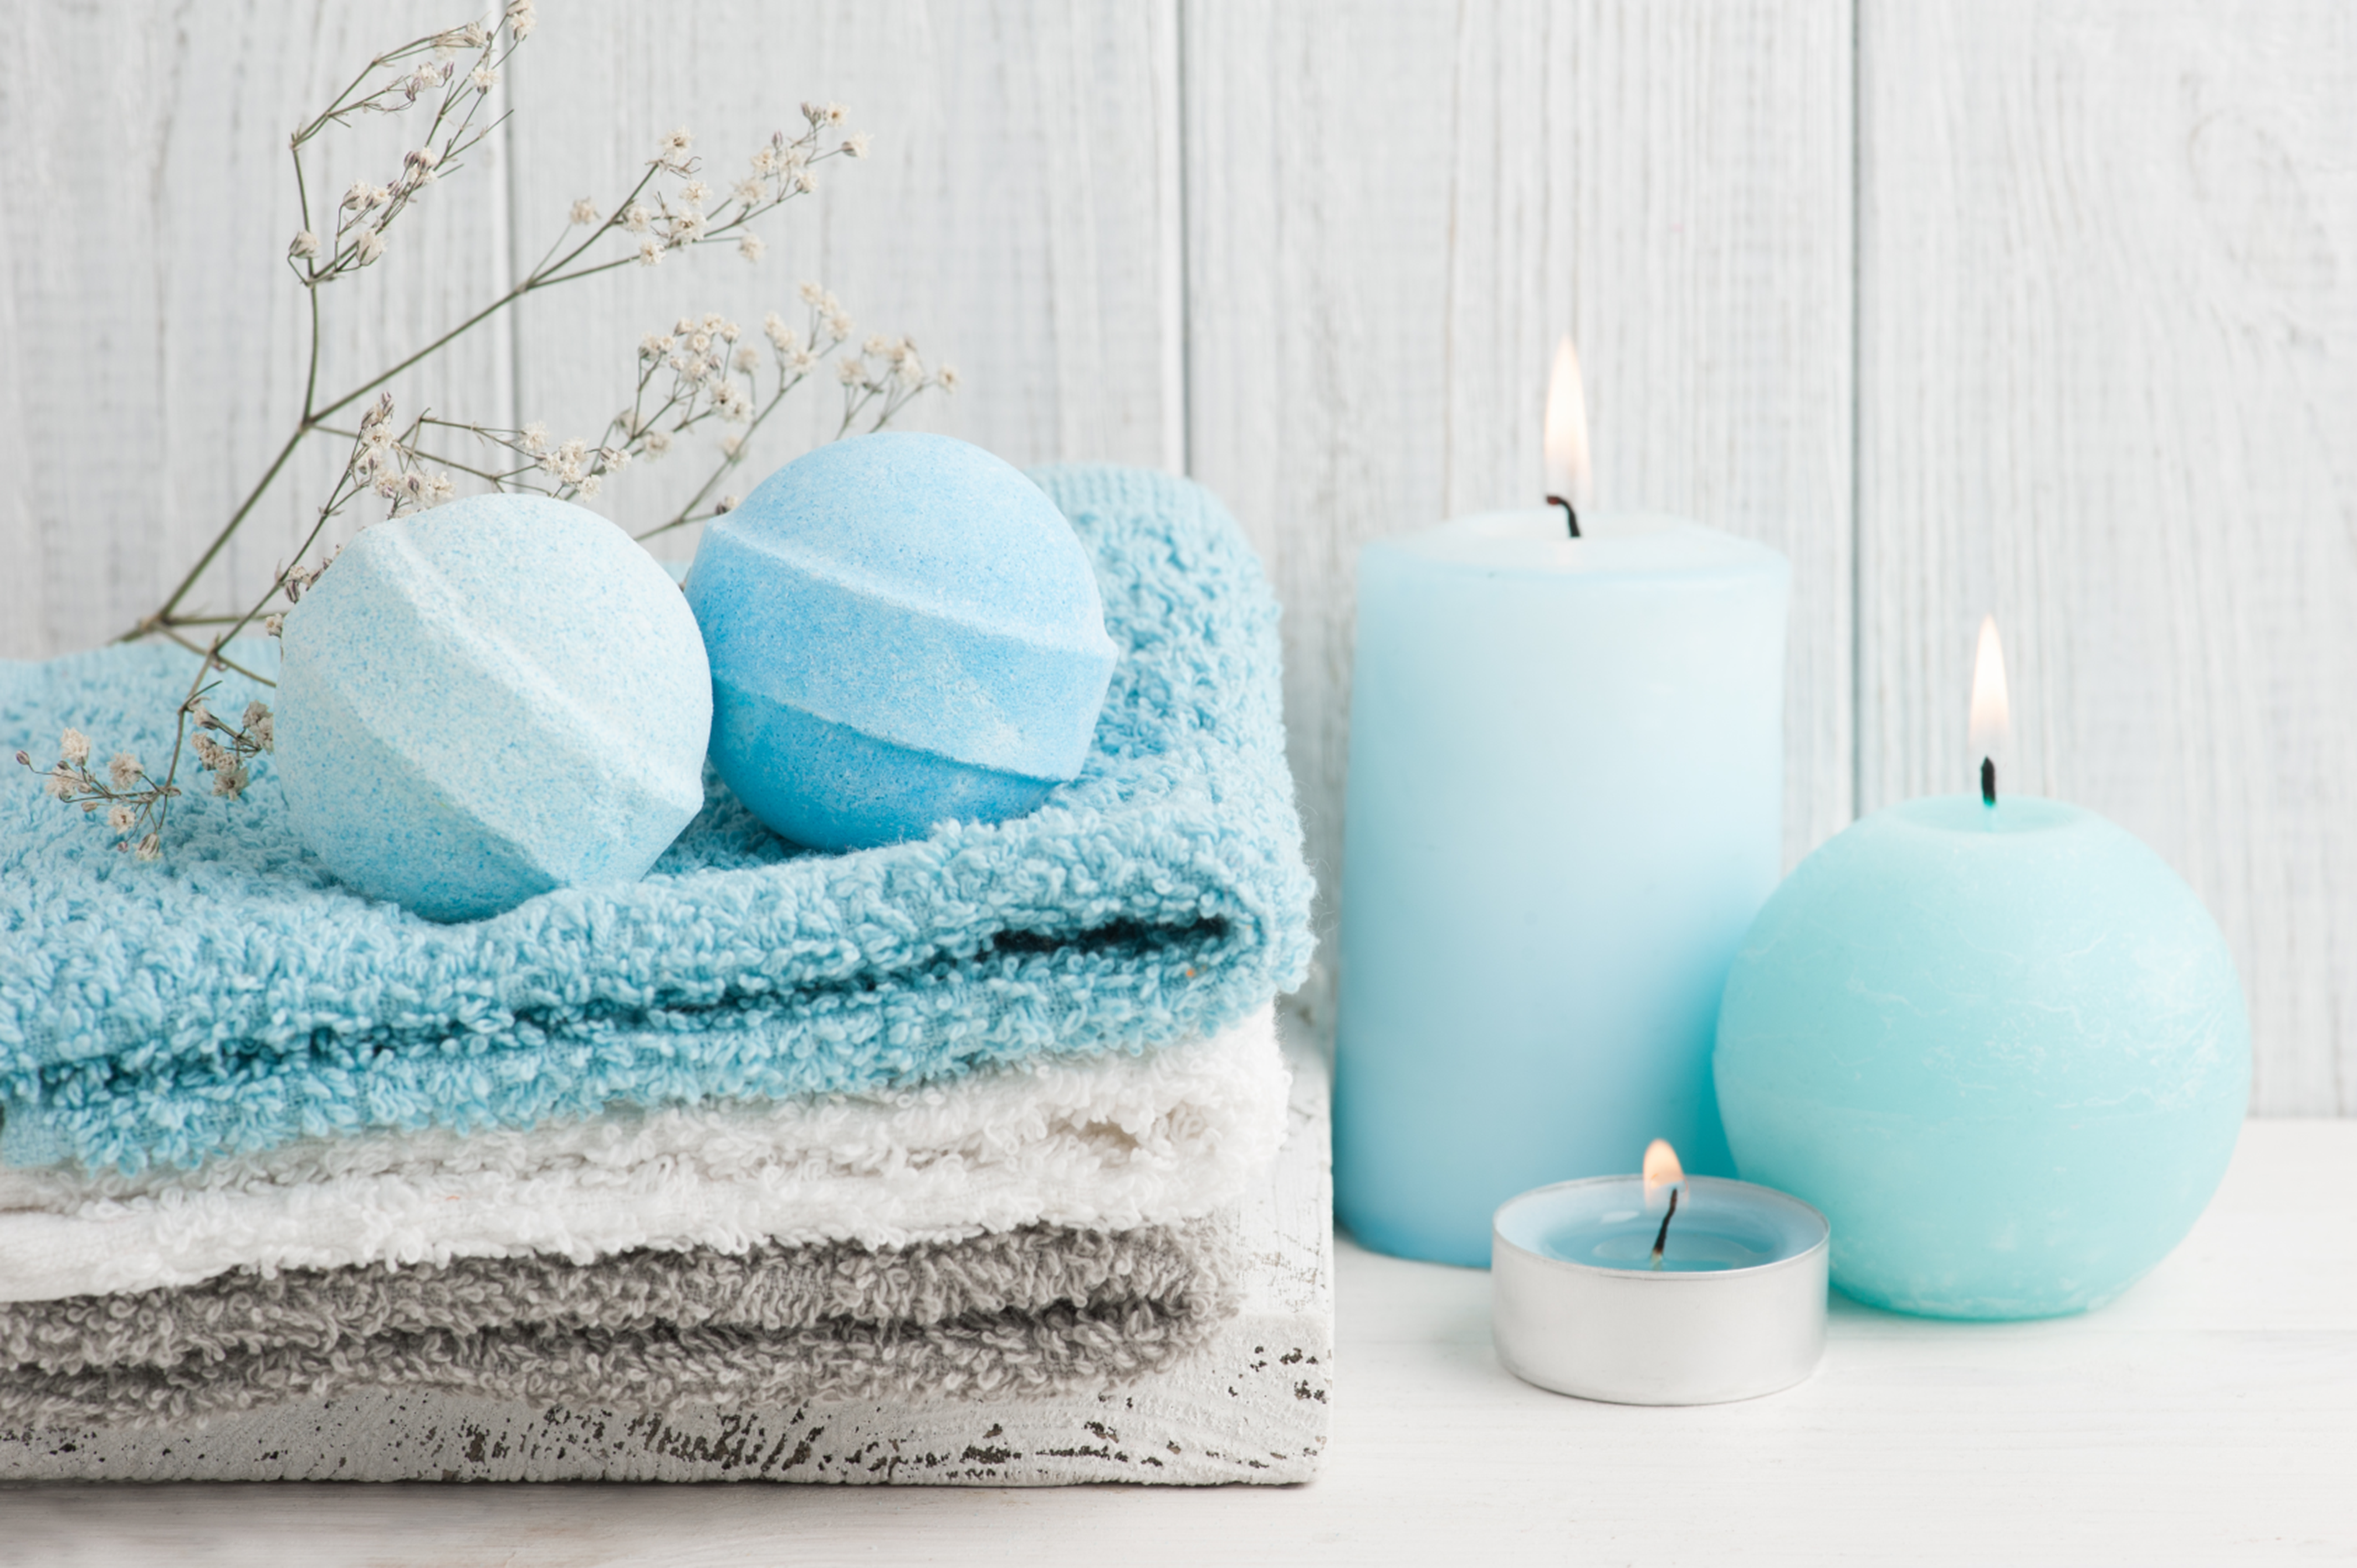 Blue bath bombs and candles on towels